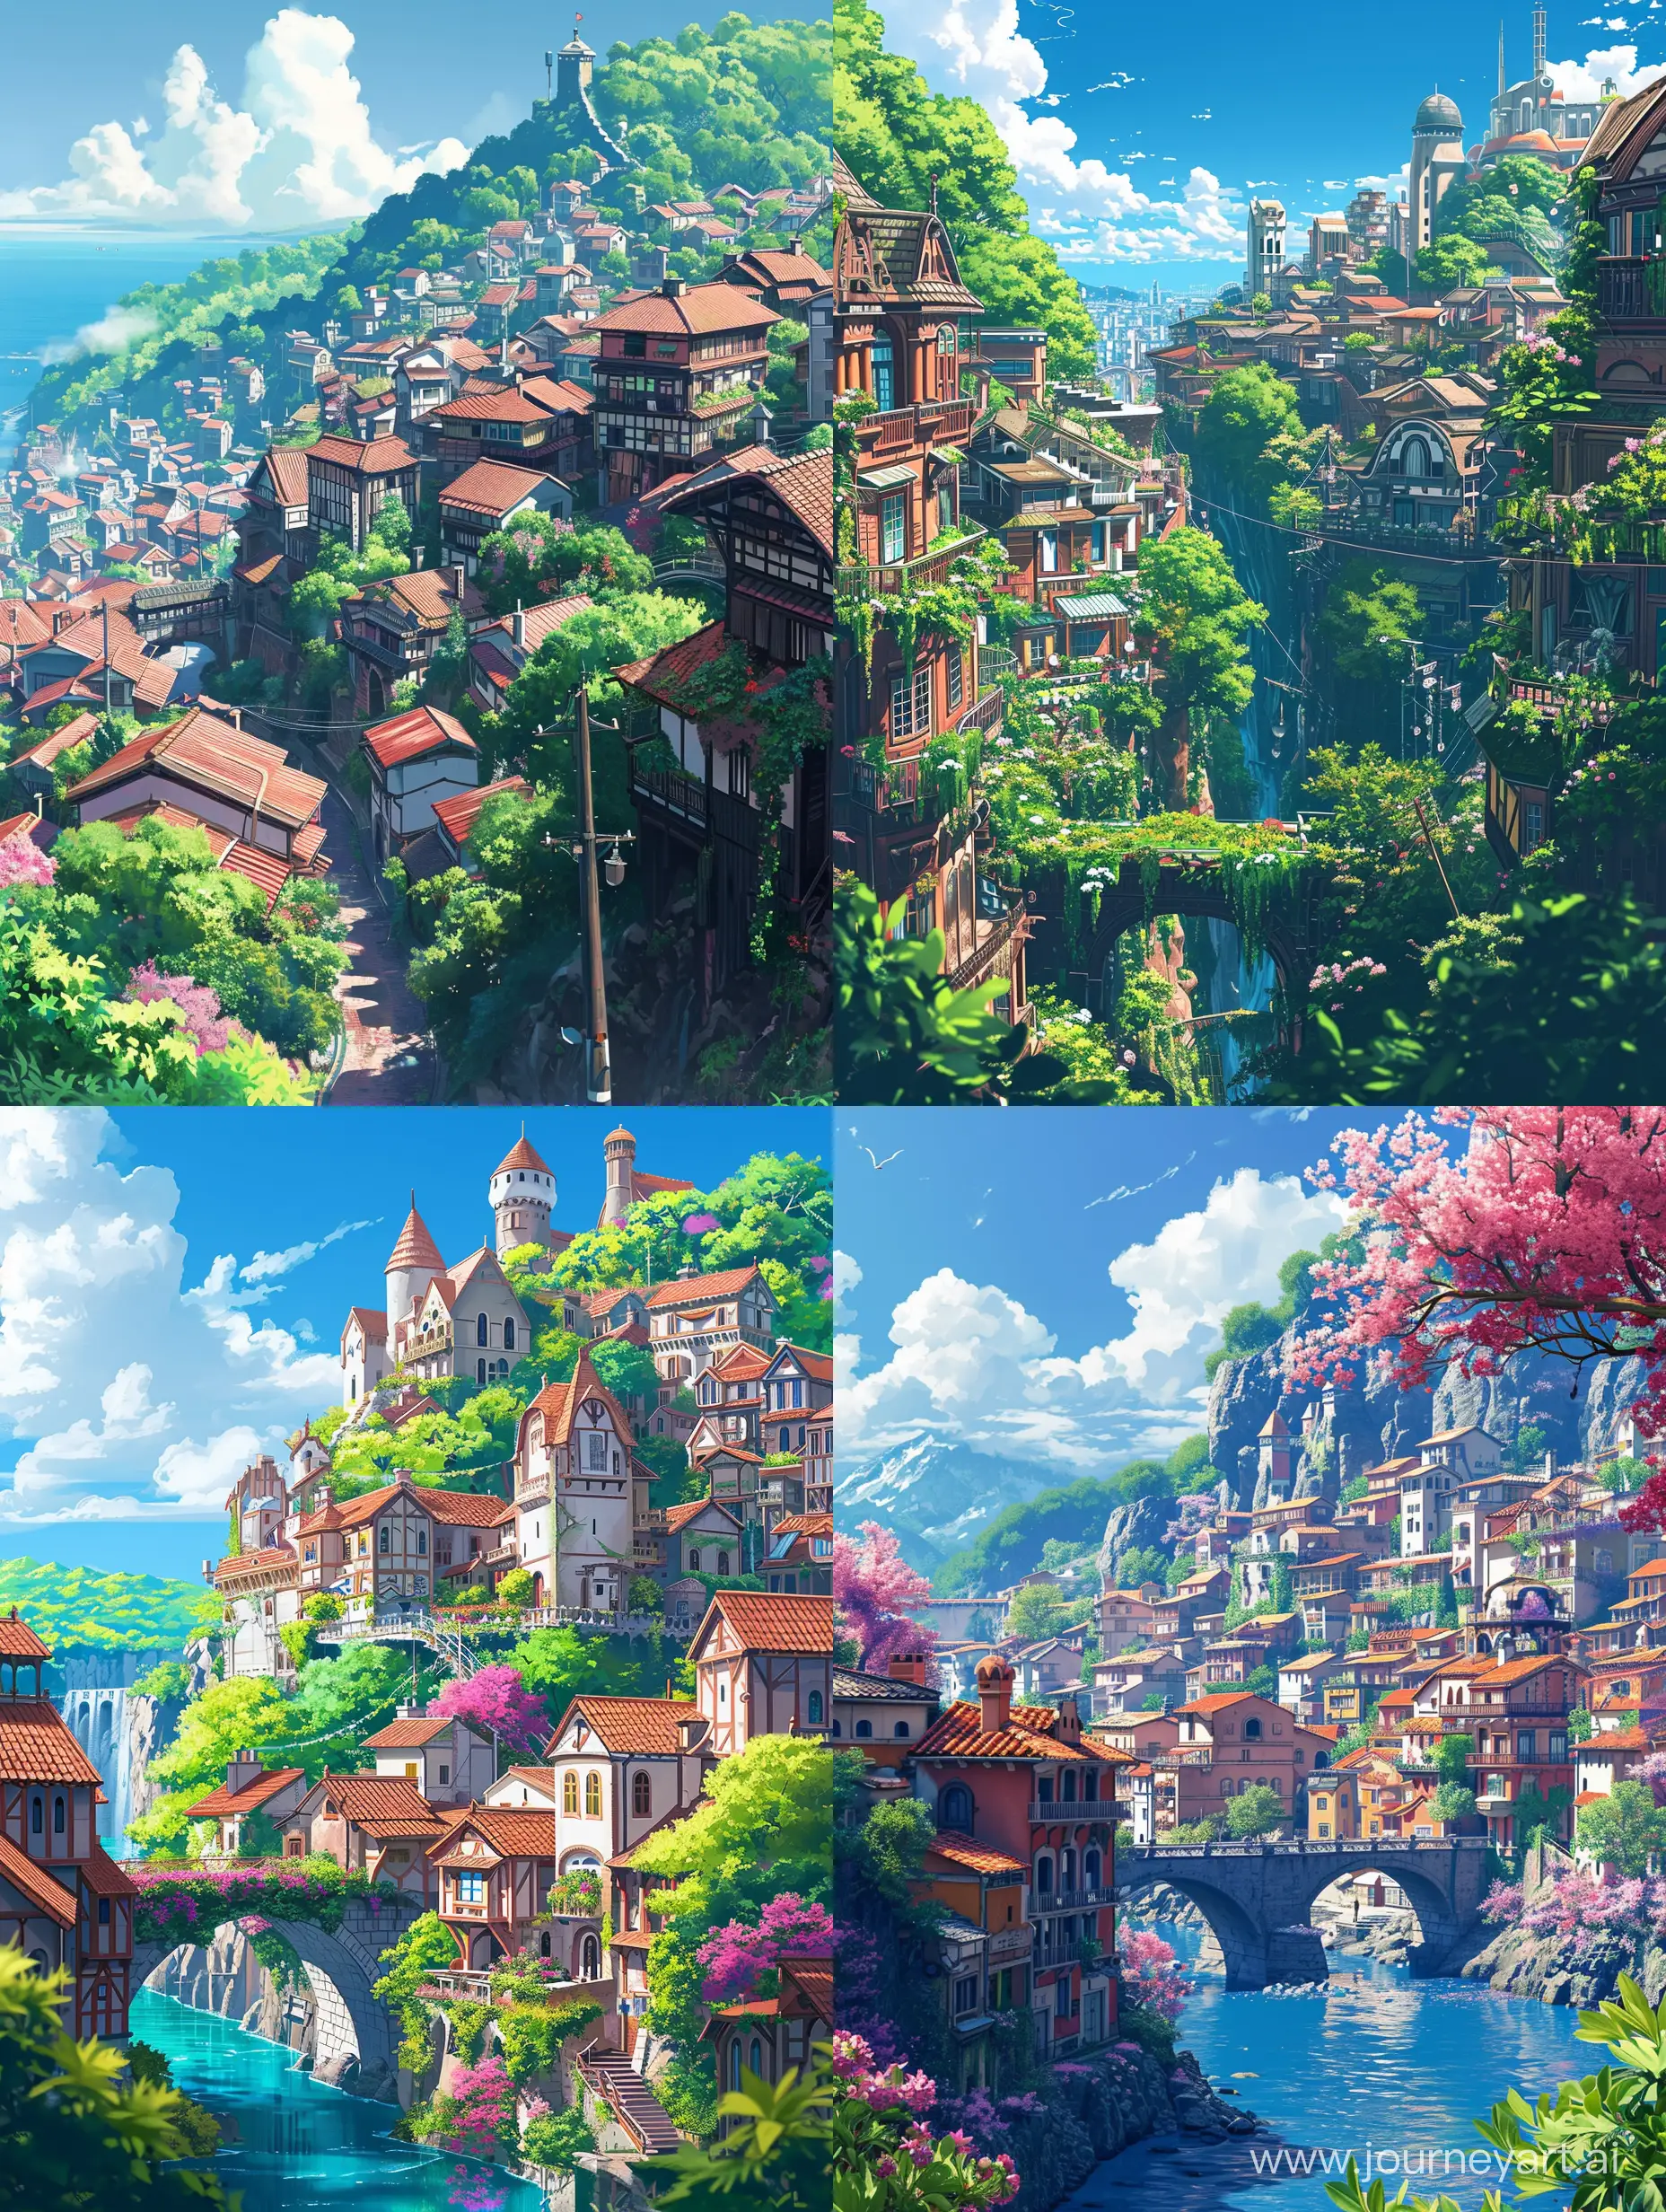 A picture of a beautiful city inspired by Studio Ghibli Art Style